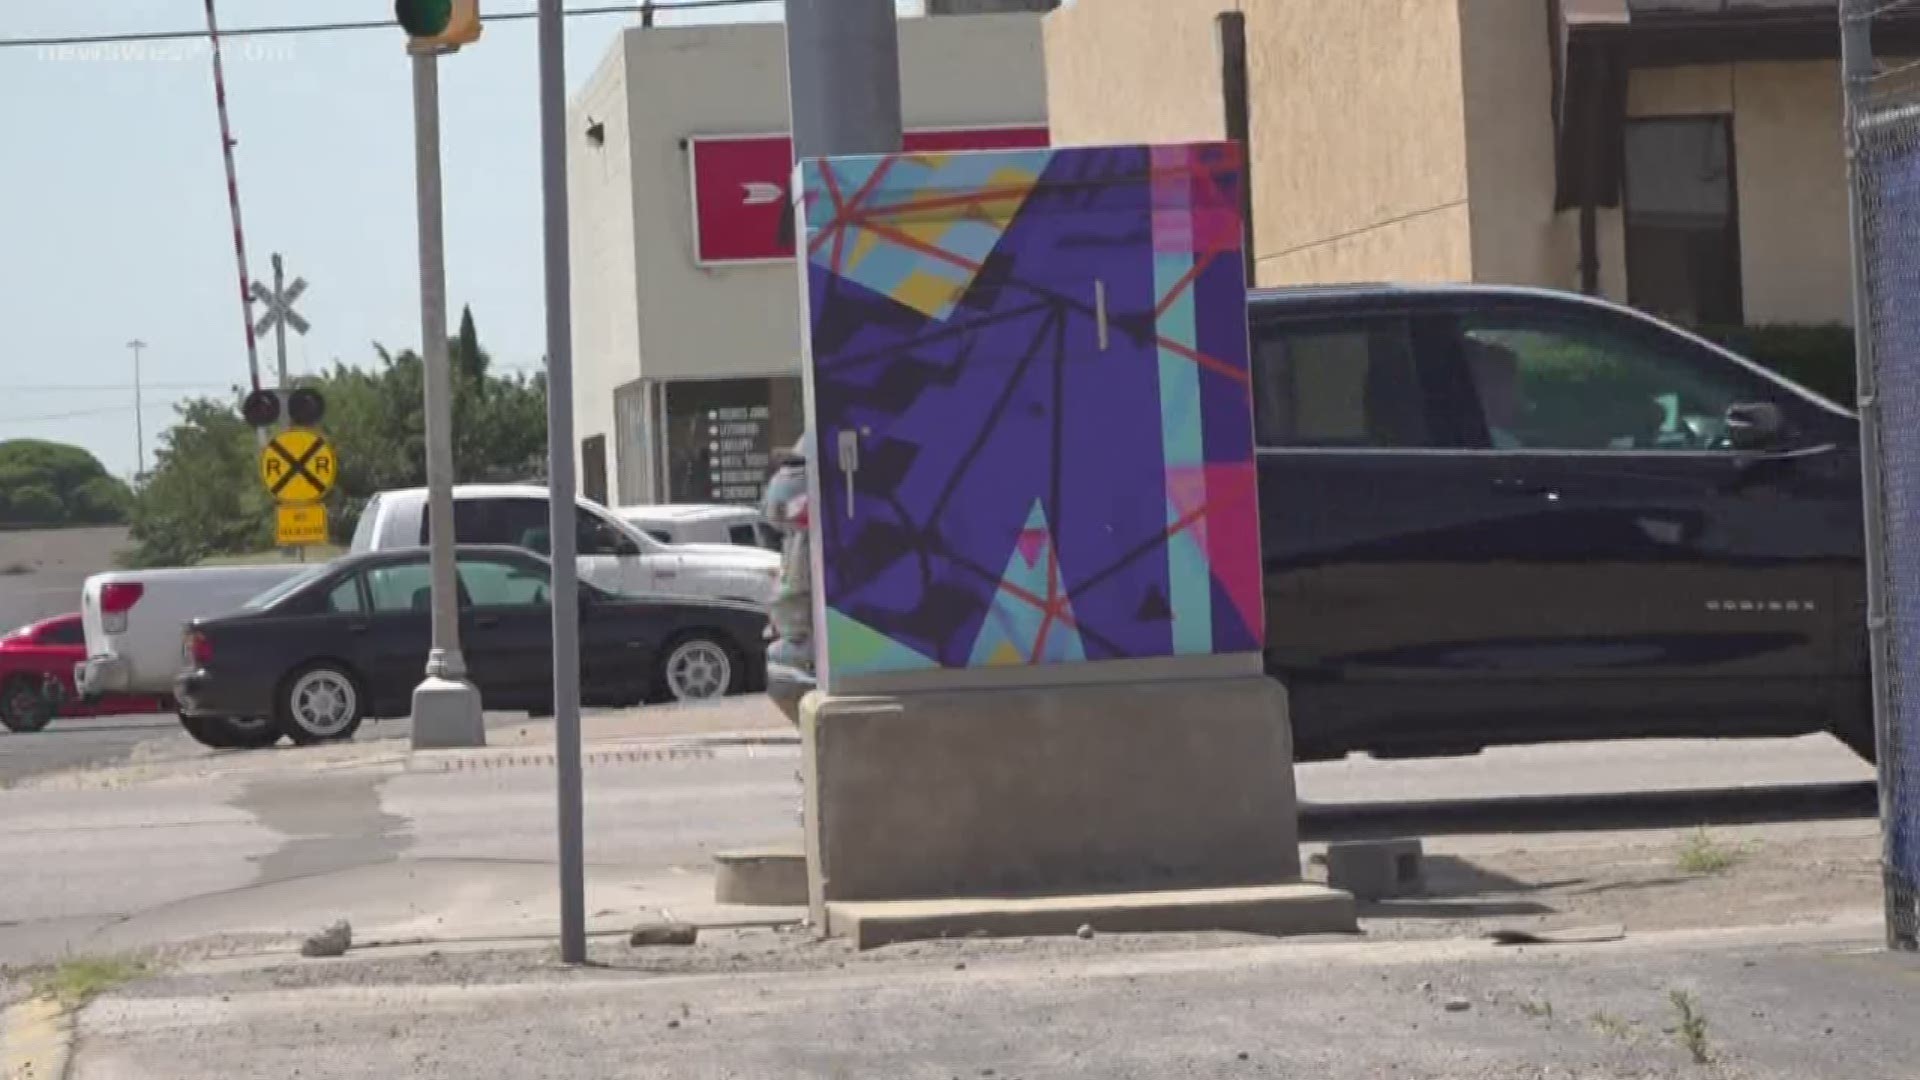 The city hopes to cover four more boxes with local art by the end of summer.